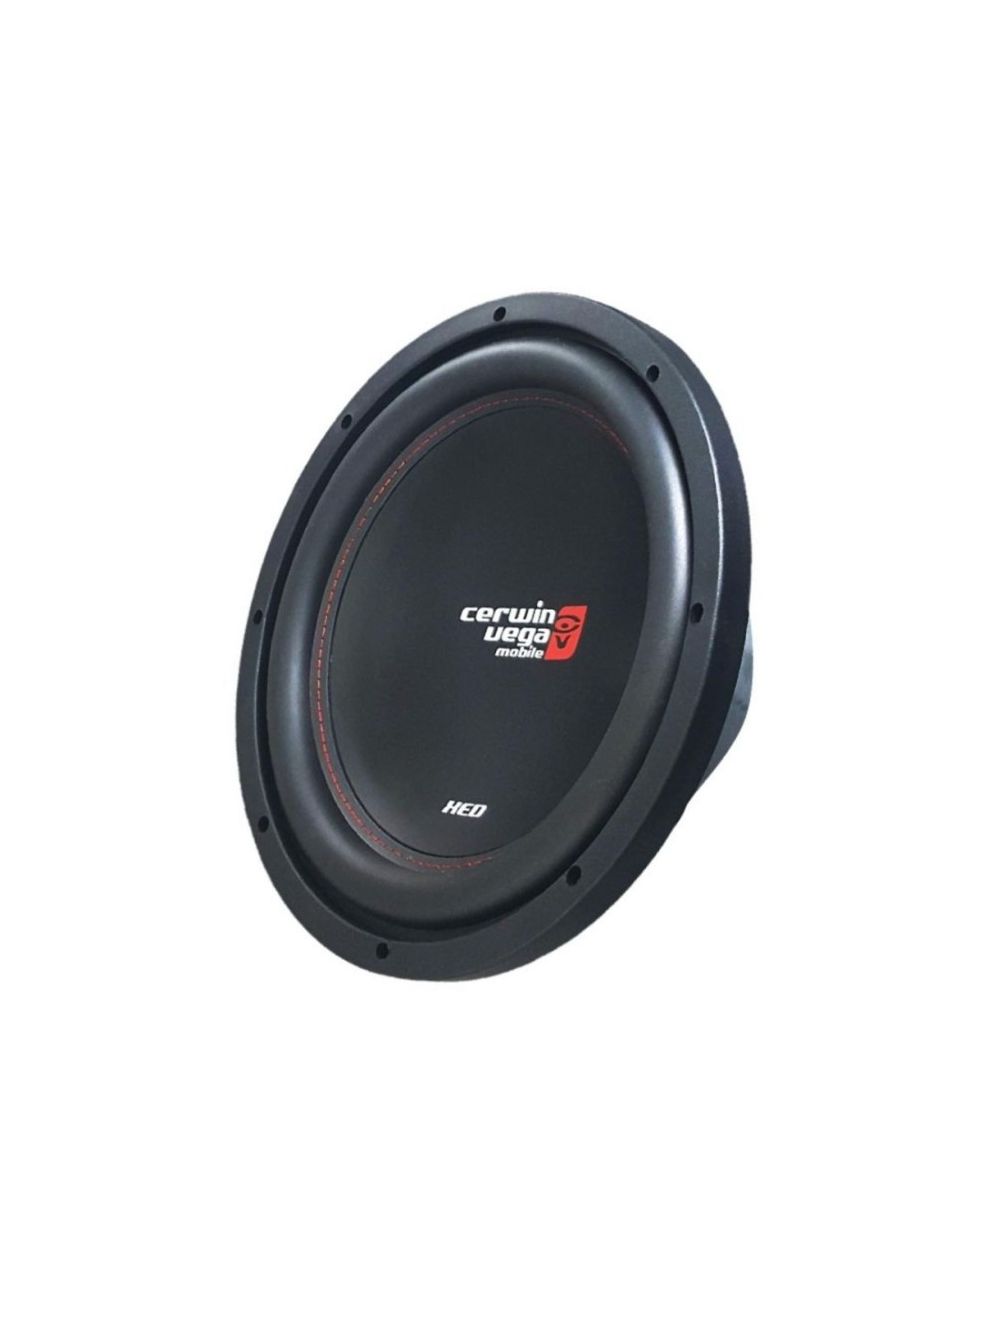 CERWIN VEGA XED12 XED 1000 Watts Max 12-Inch SVC Woofer 4 Ohms 